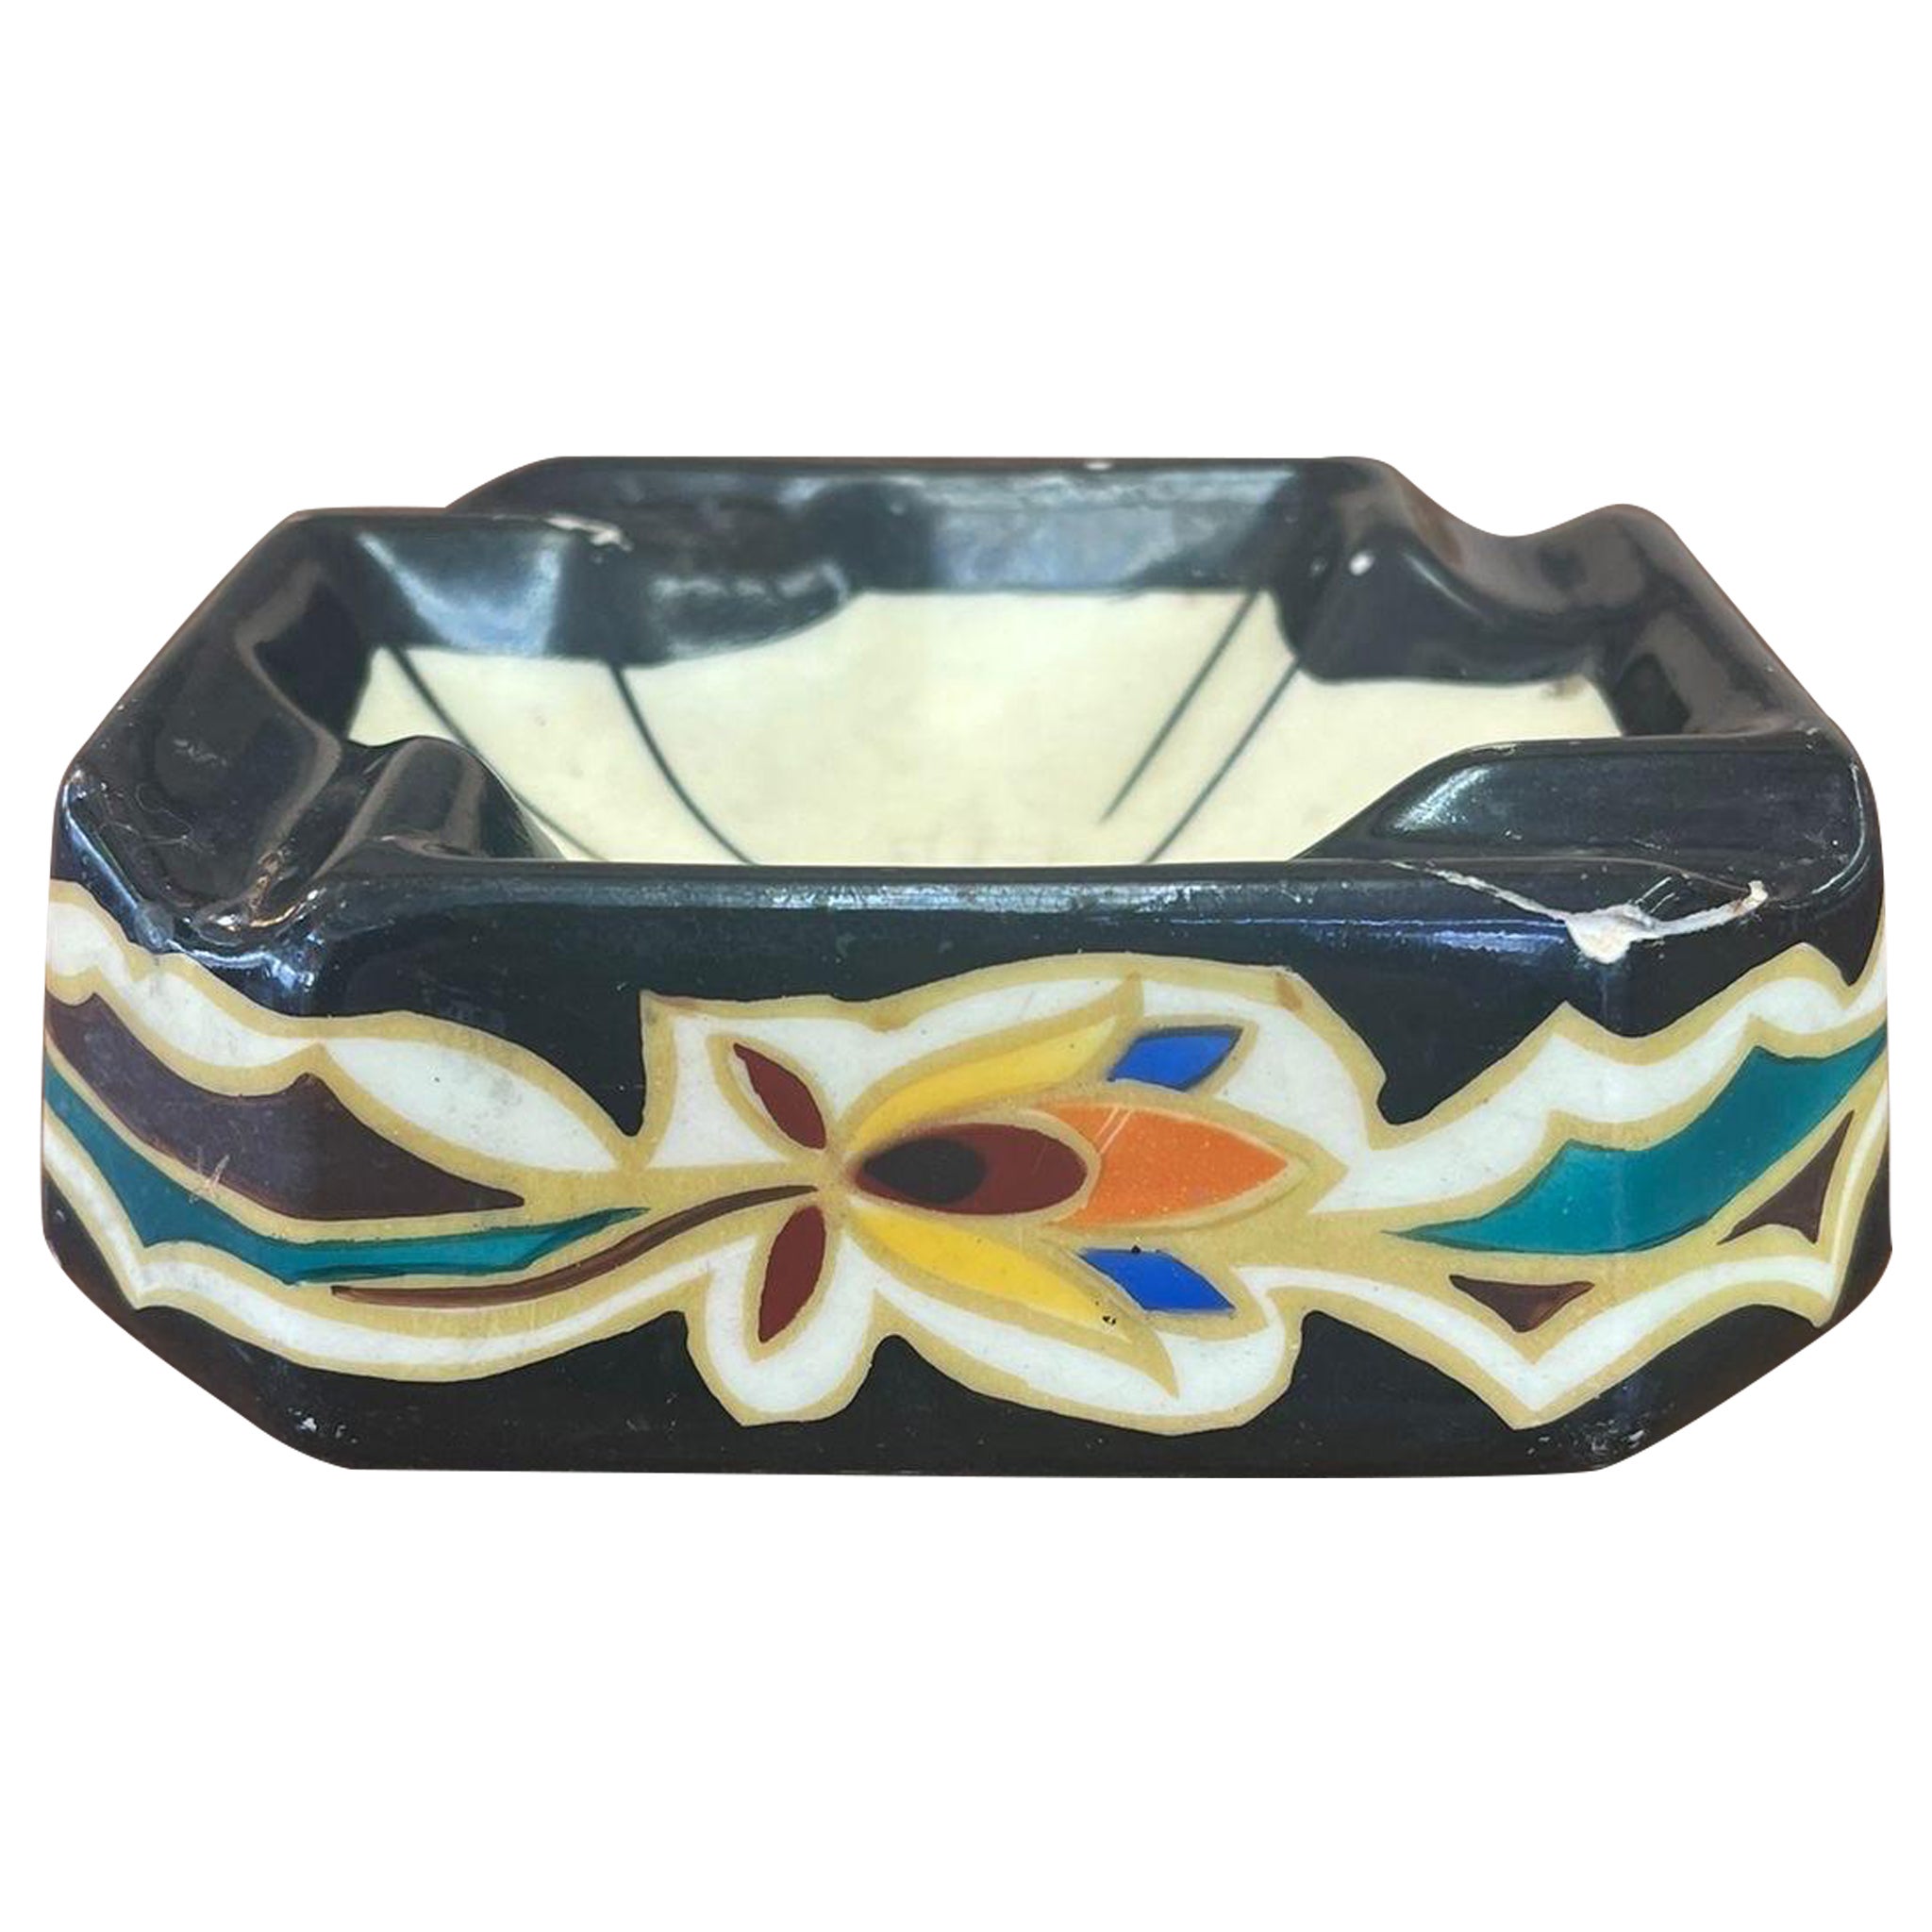 Vintage Ceramic Hand Painted Ashtray. Imported From Holland.